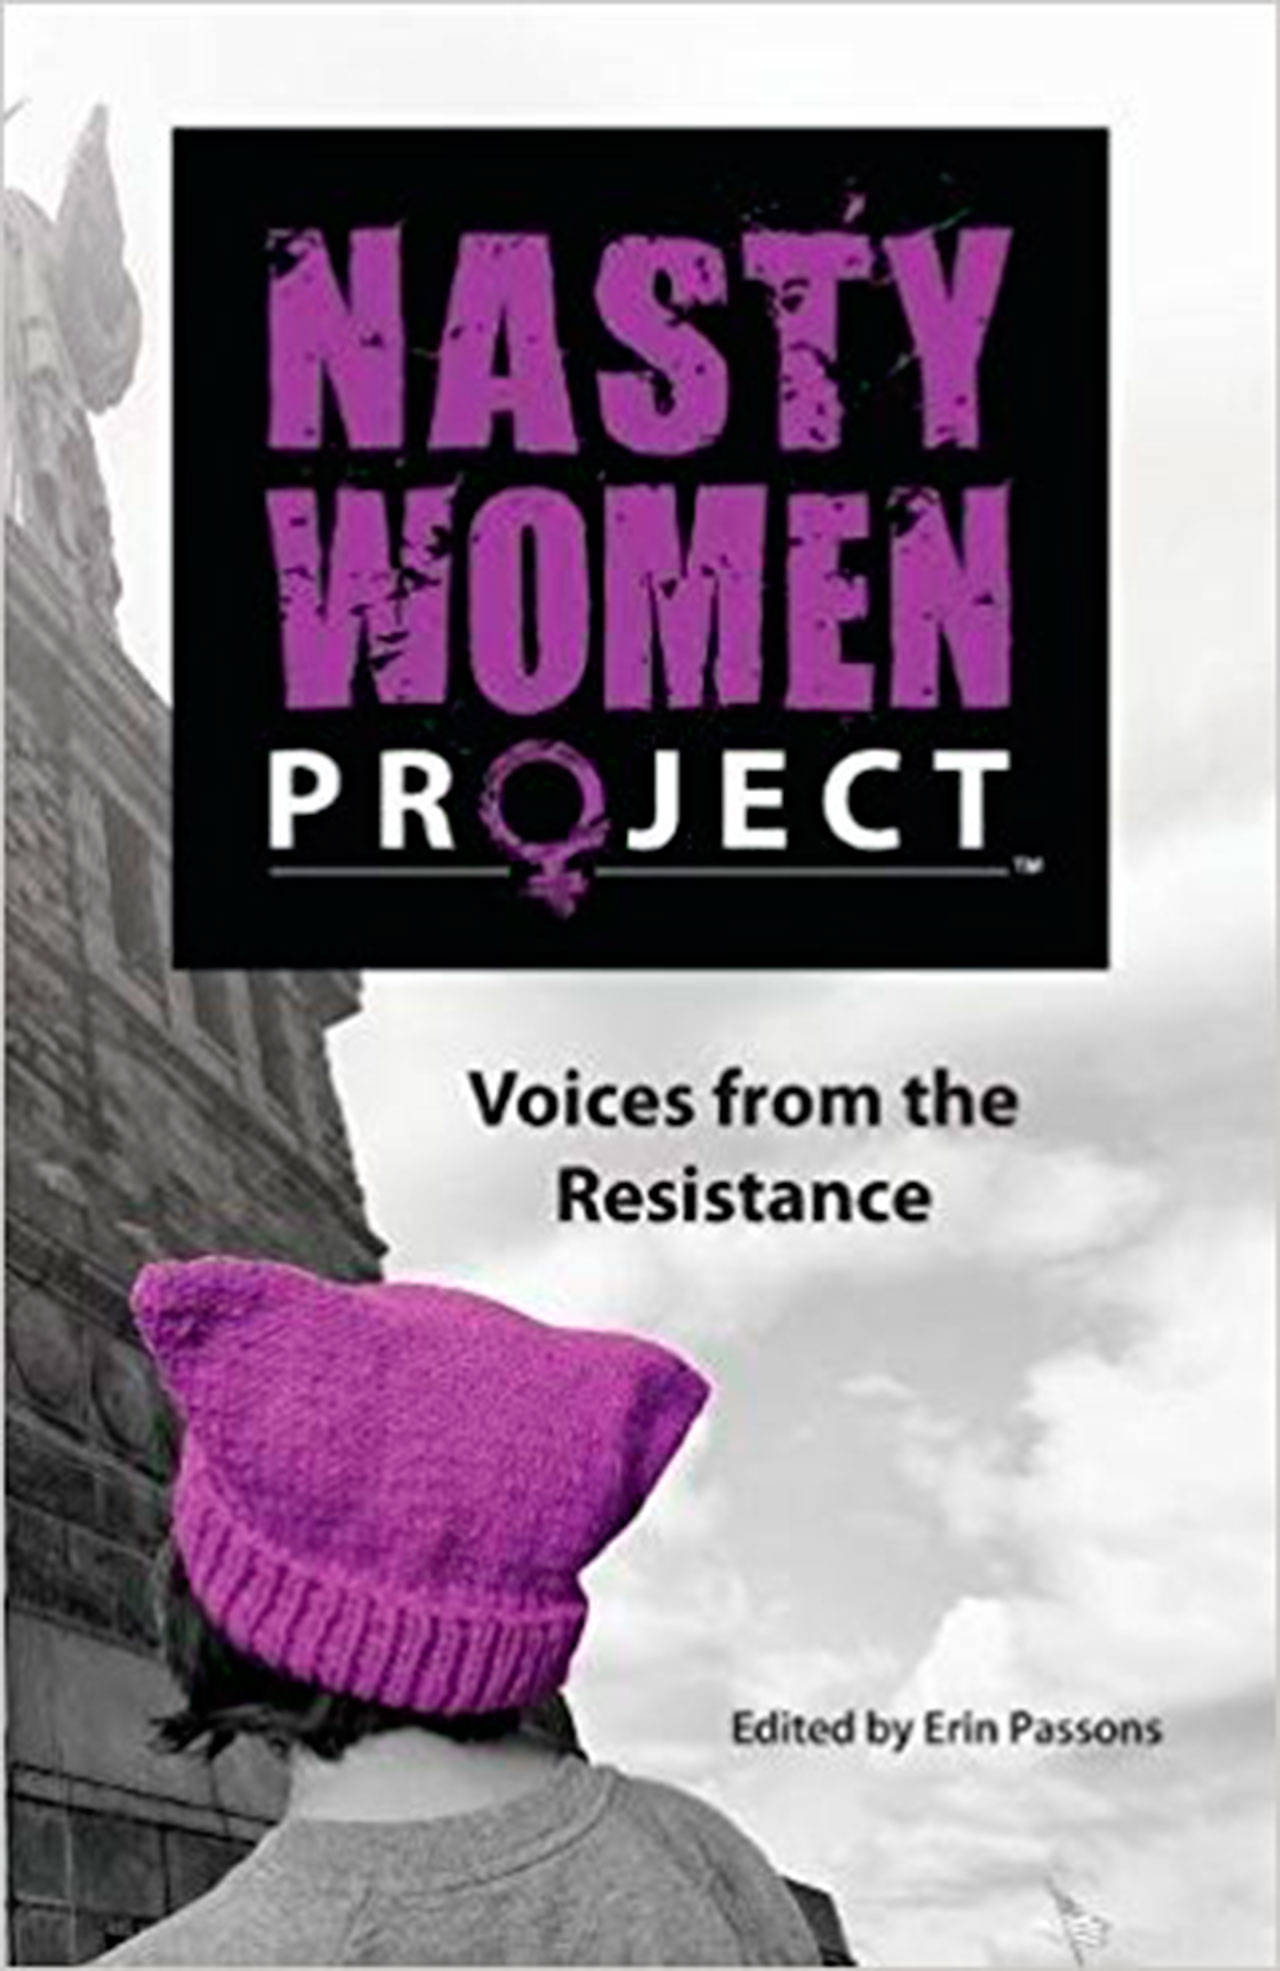 Image courtesy of Eagle Harbor 
Book Company                                 In celebration of Independent Book Store Day, contributors to the “Nasty Women Project” will be at Eagle Harbor Book Company from 
10:30 a.m. to noon to sign copies of the book and meet supporters.